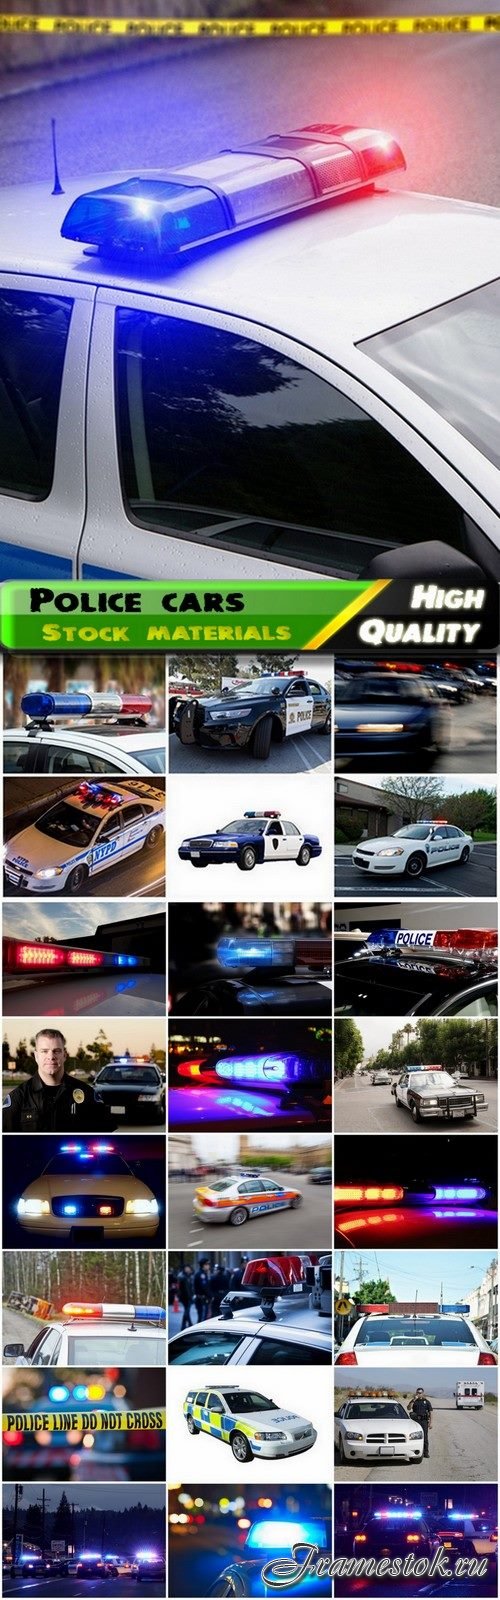 Police cars with red-blue flashing lights - HQ Jpg